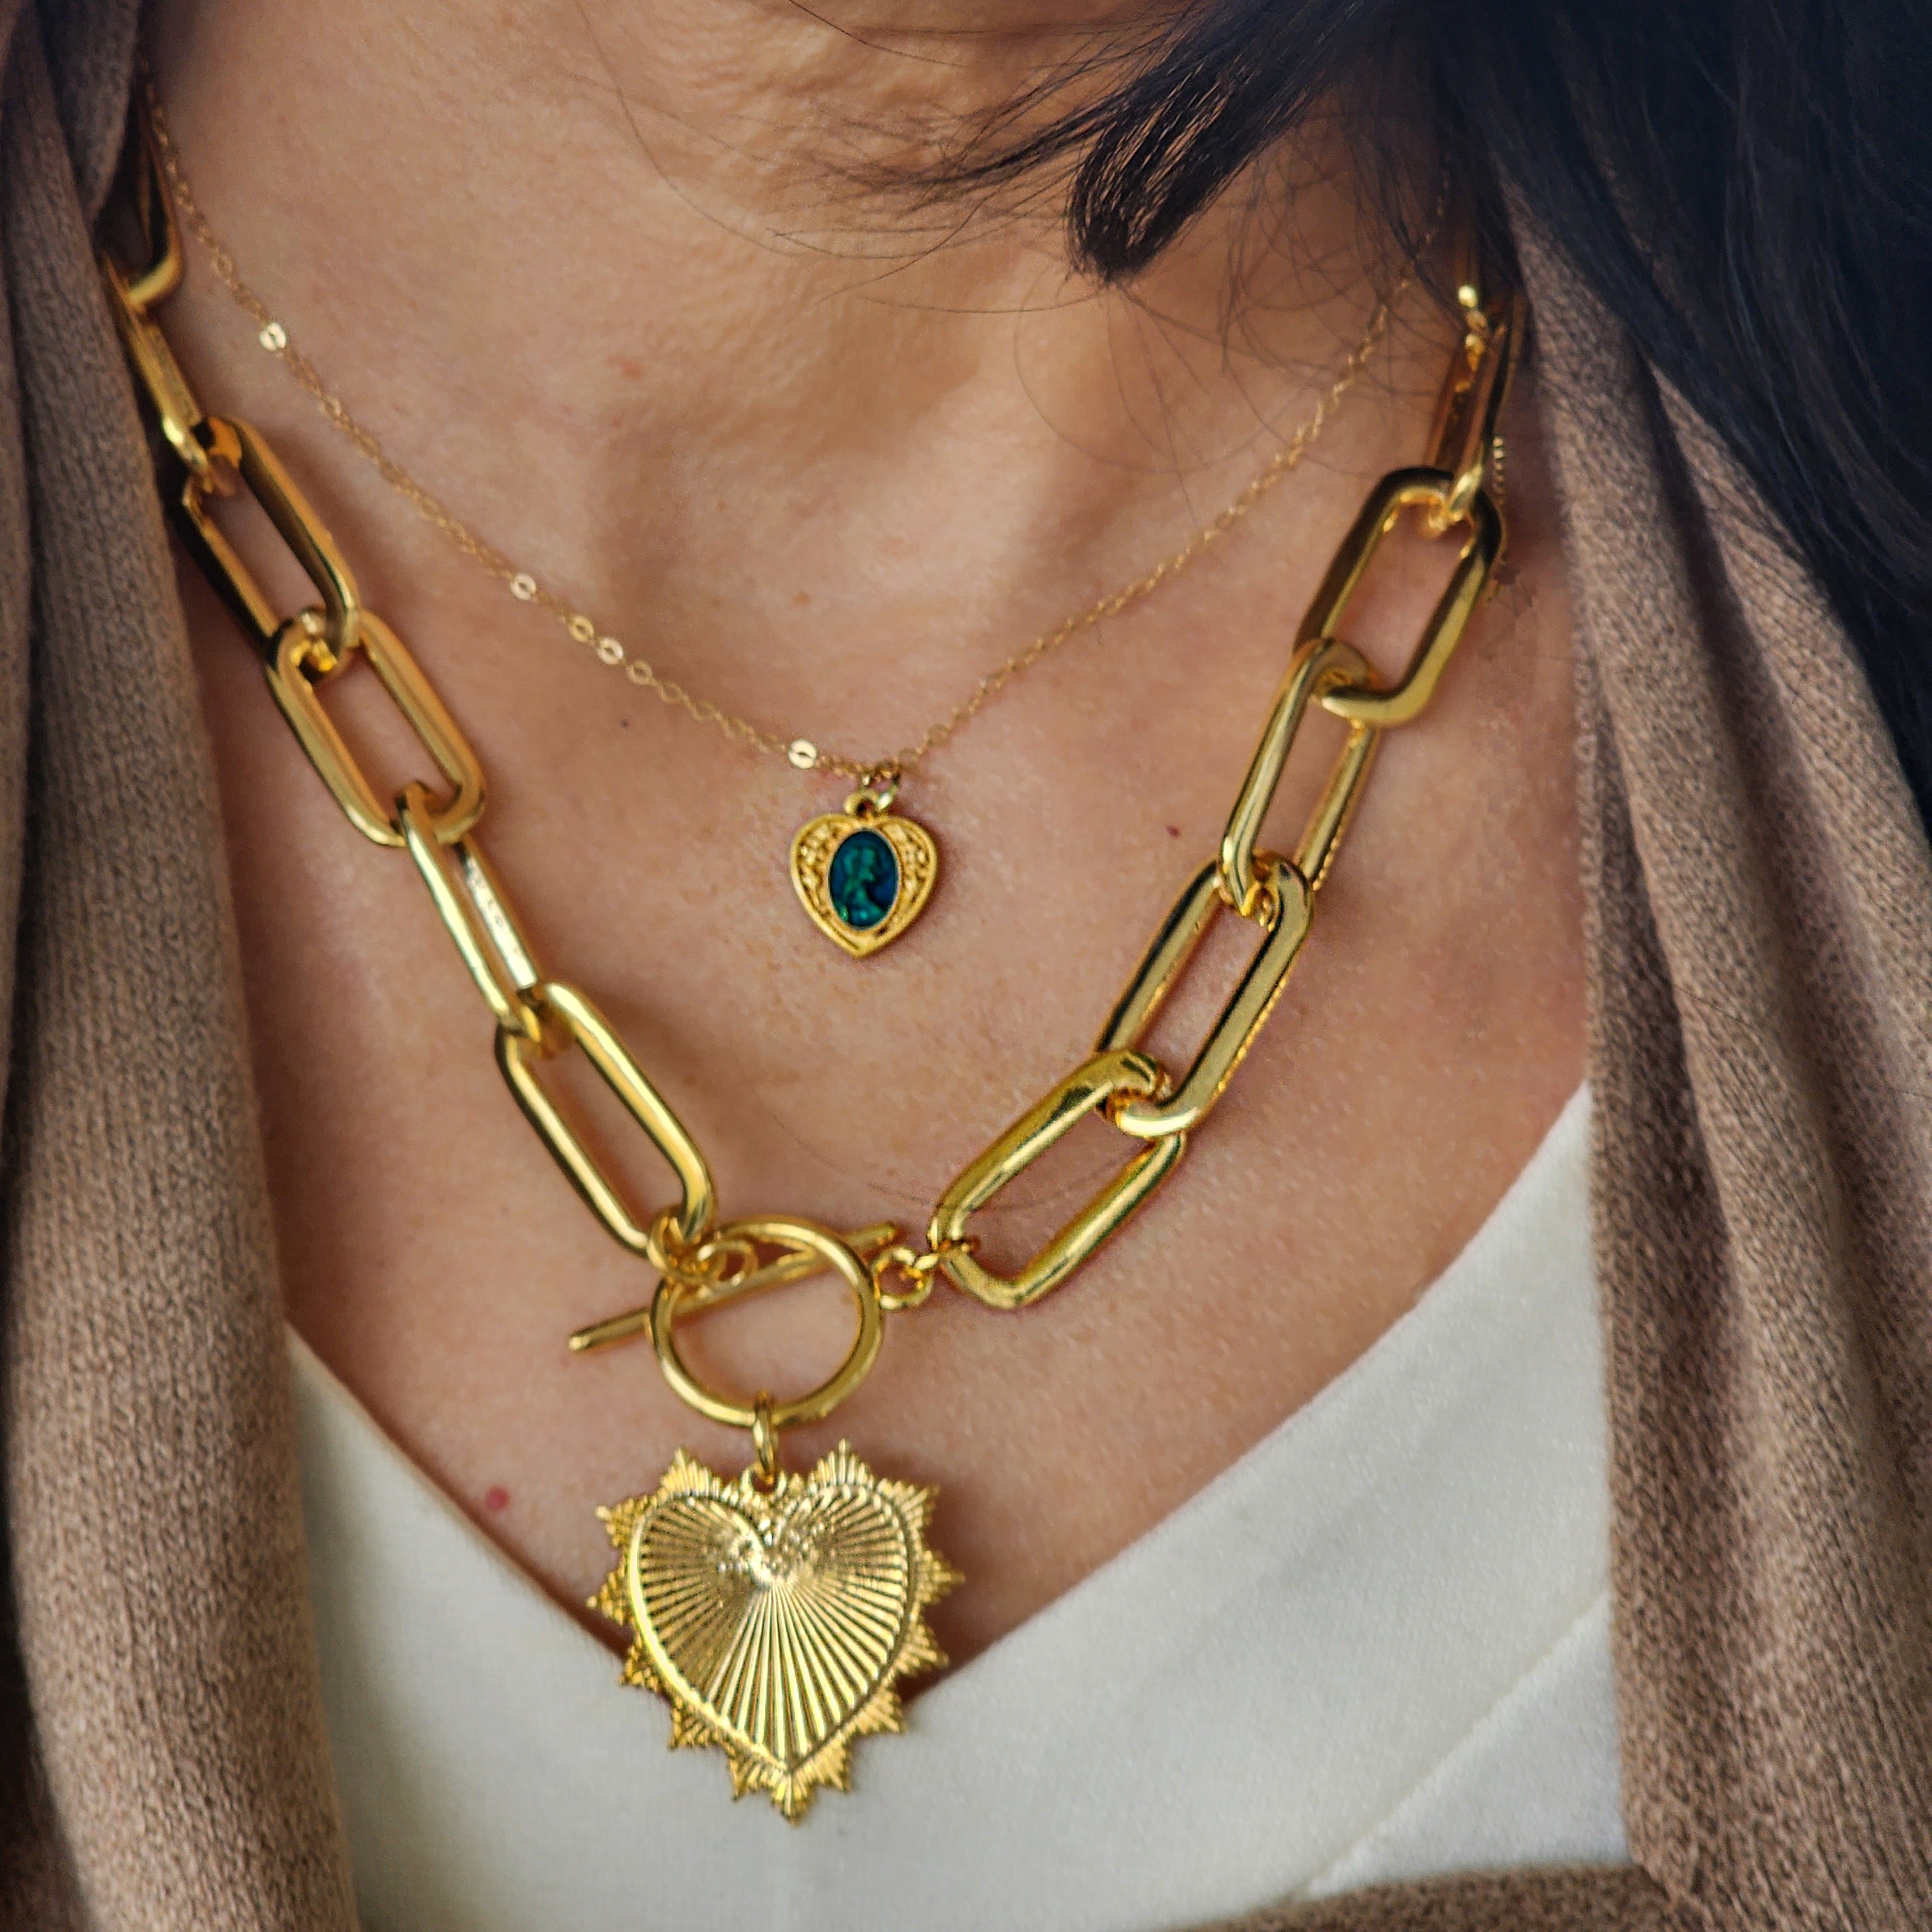 Mary's Love Necklace